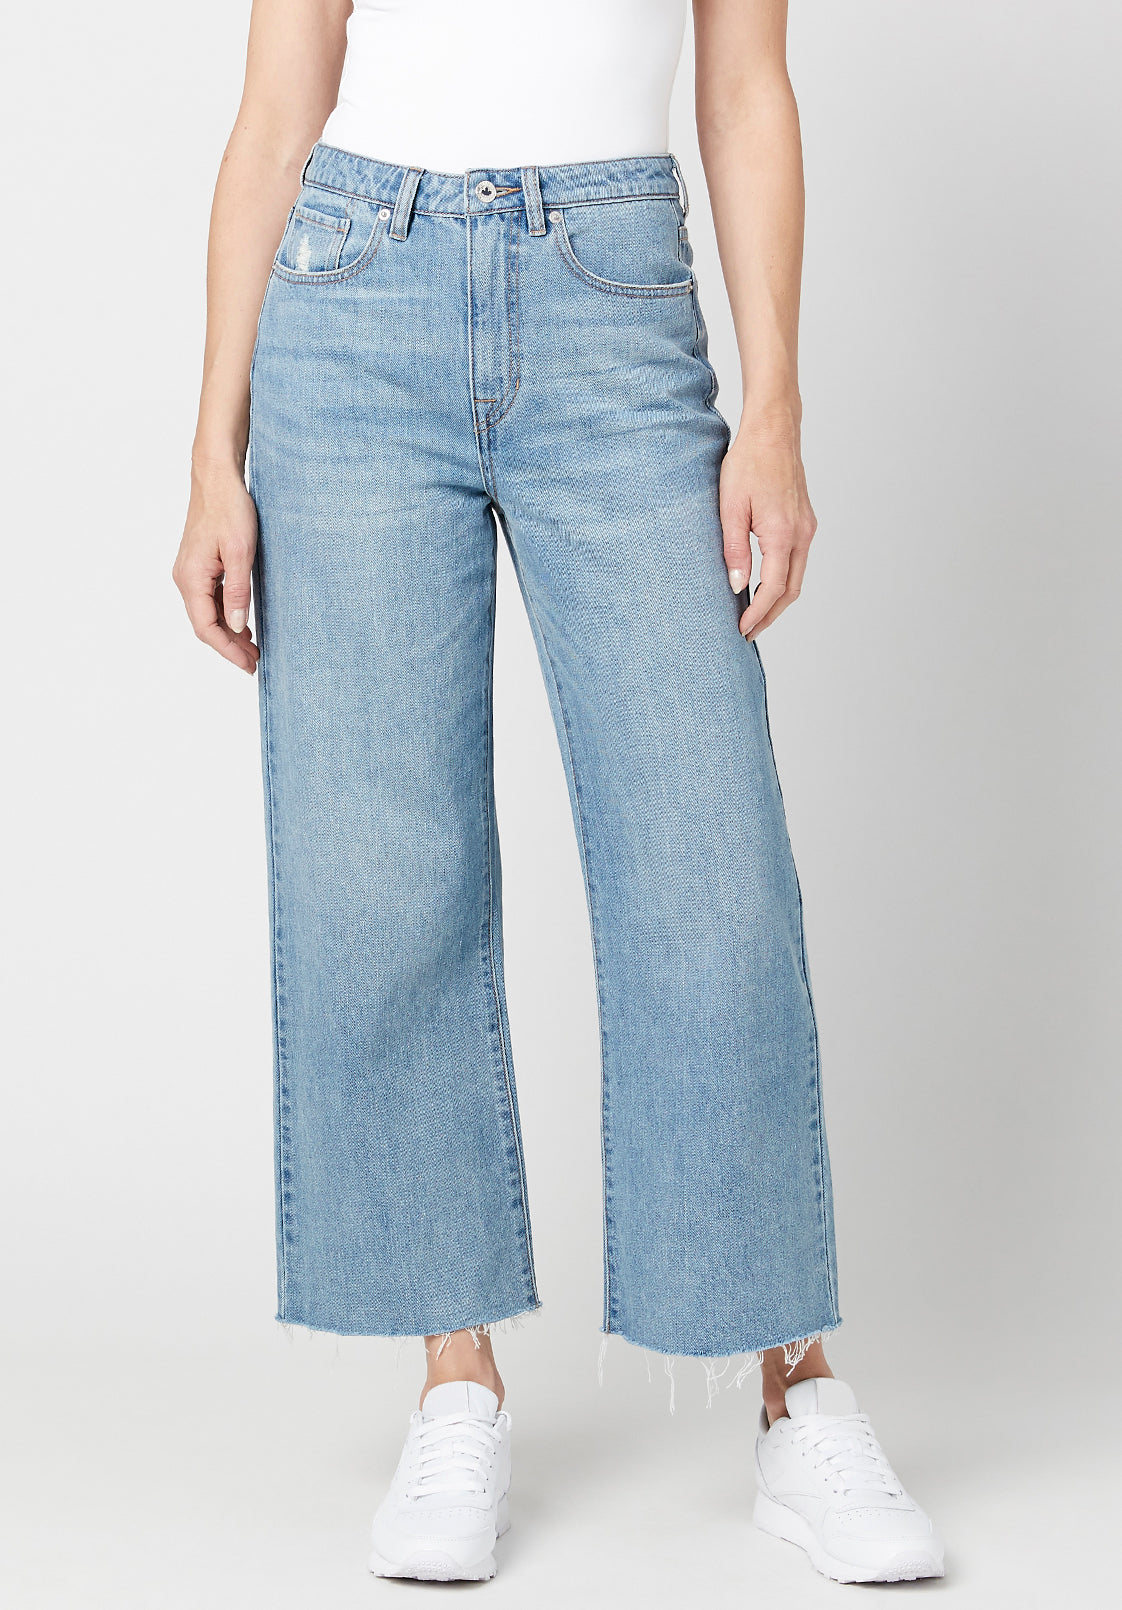 Wide Leg Addisson Women's Cropped Jeans in Antique Whiskered Light